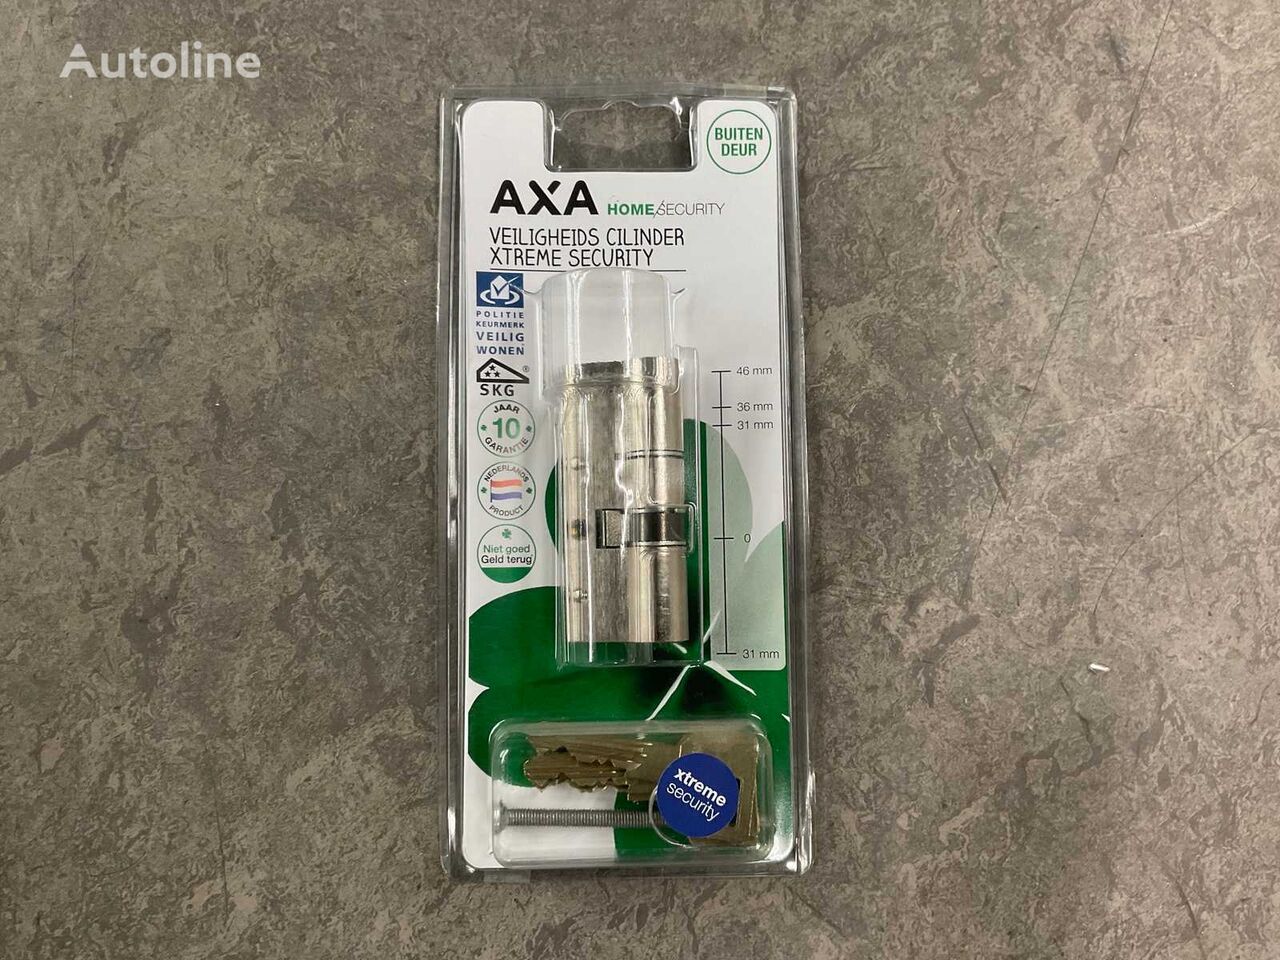 AXA Xtreme Security motorcycle accessories